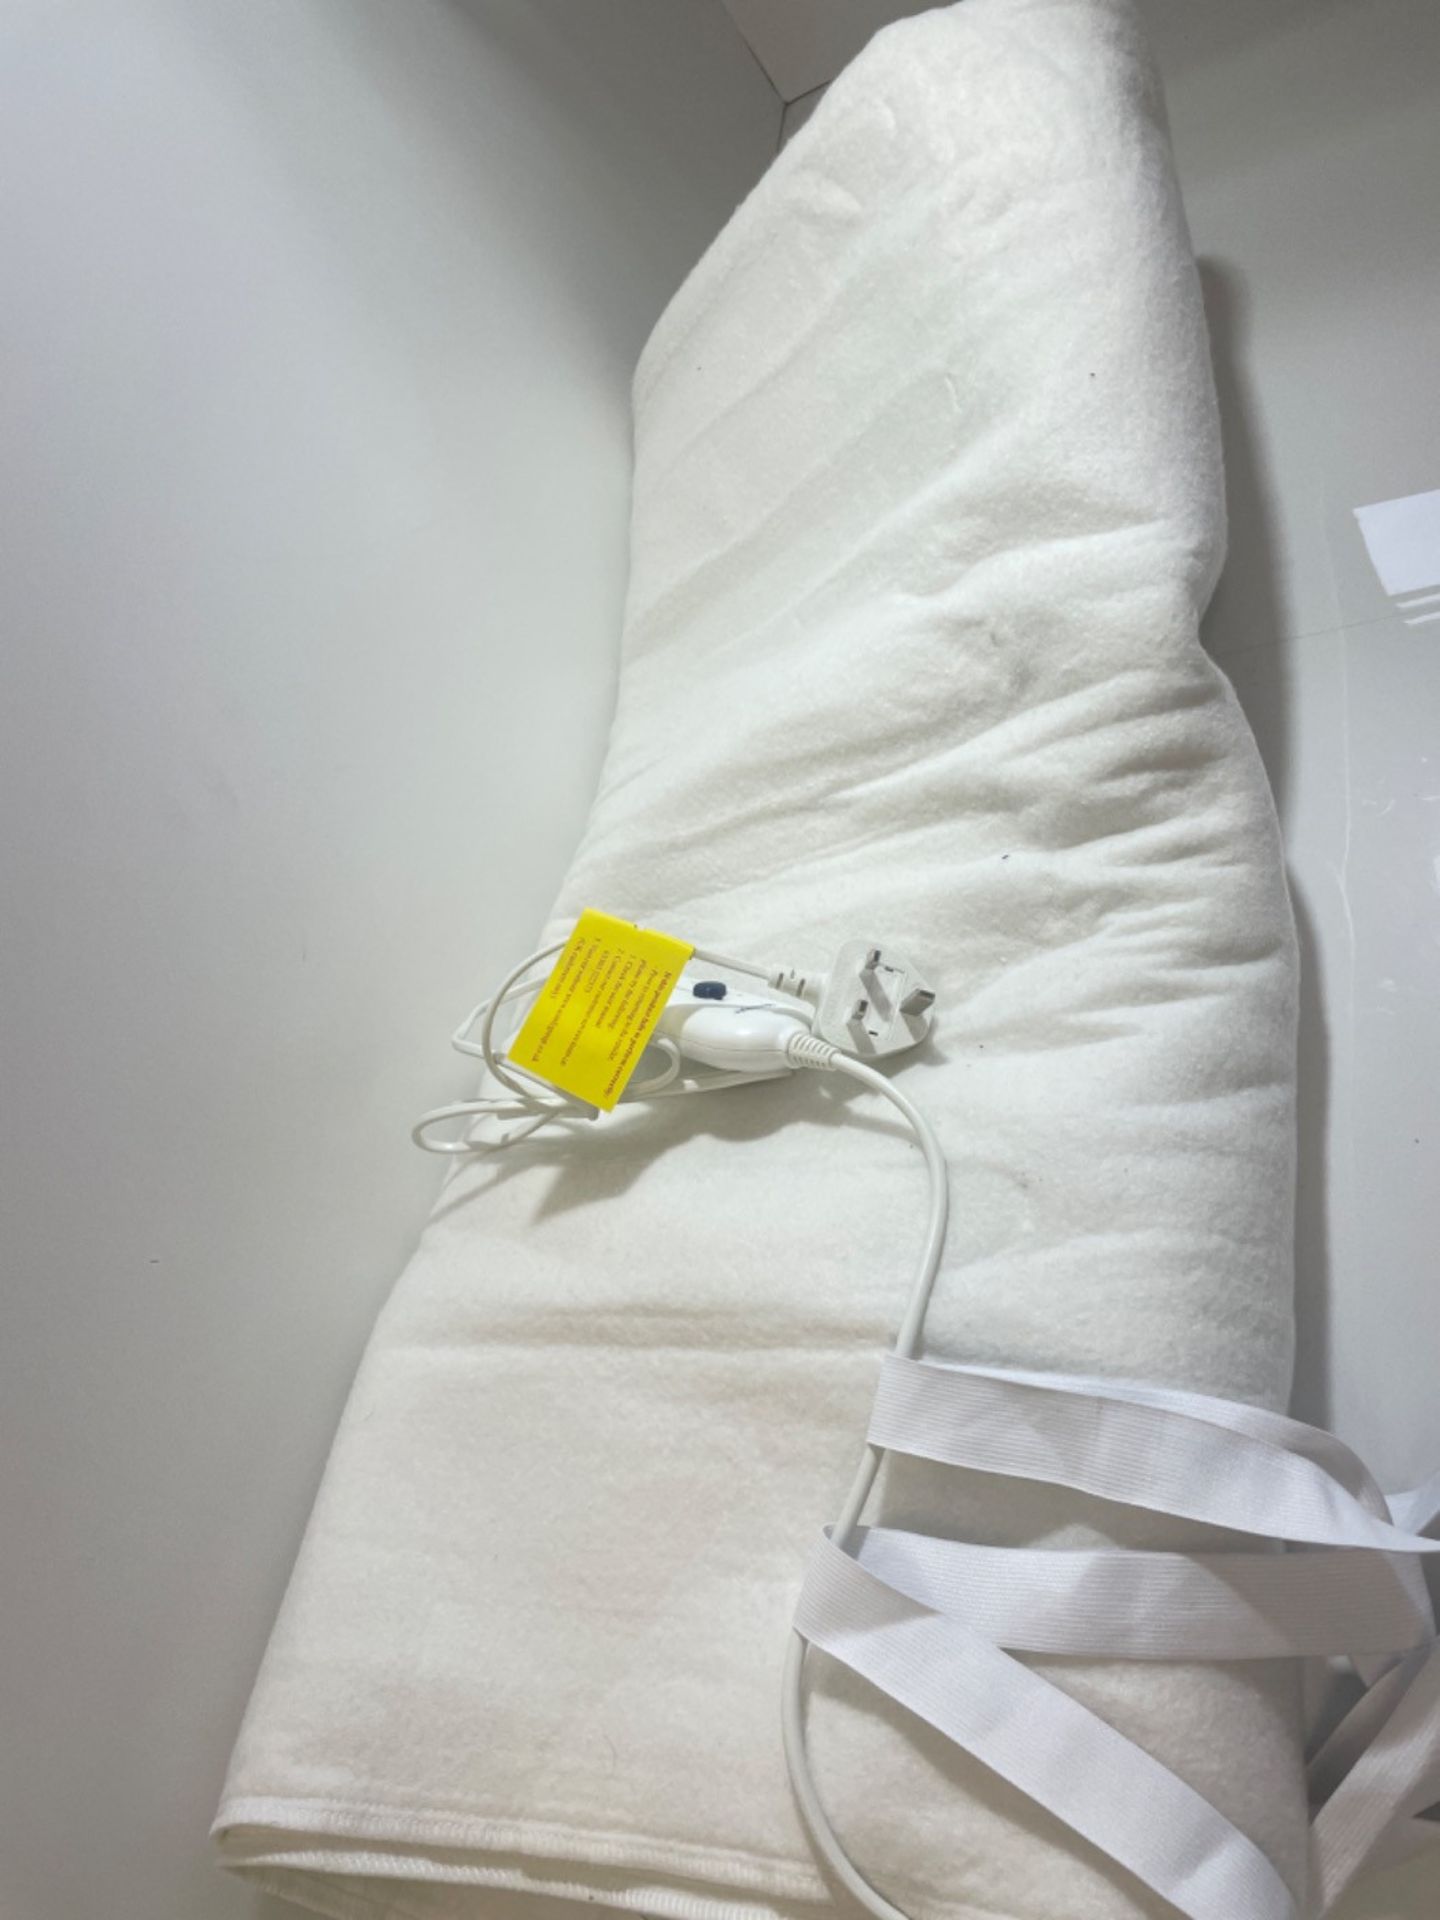 Silentnight Comfort Control Electric Blanket Super King - Heated Electric Fitted Underblanket with  - Image 2 of 3